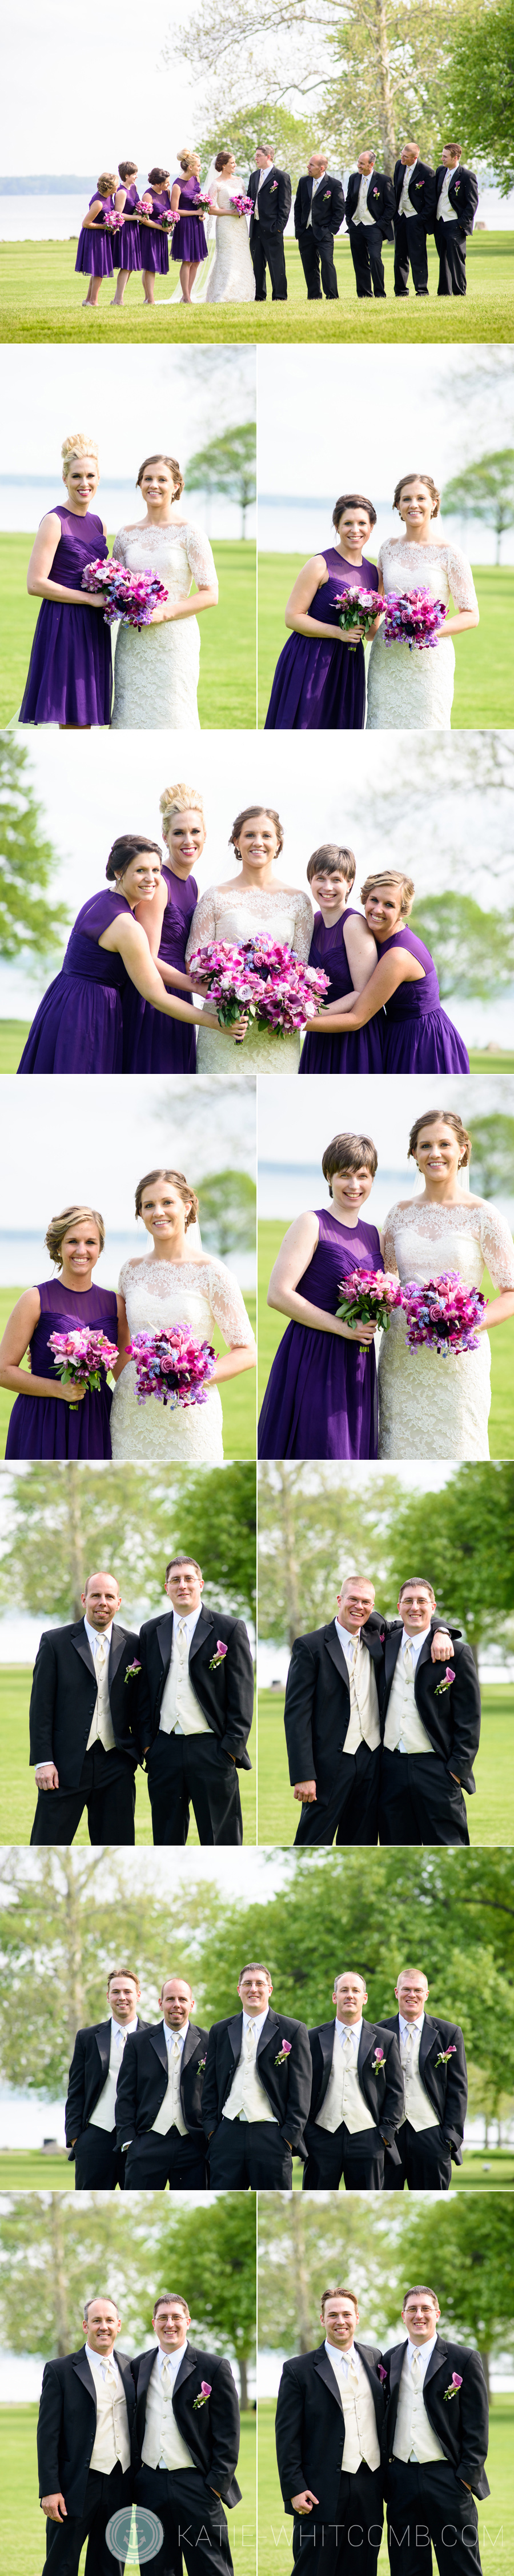 Bridal Party portraits by the lake on Culver Academy campus